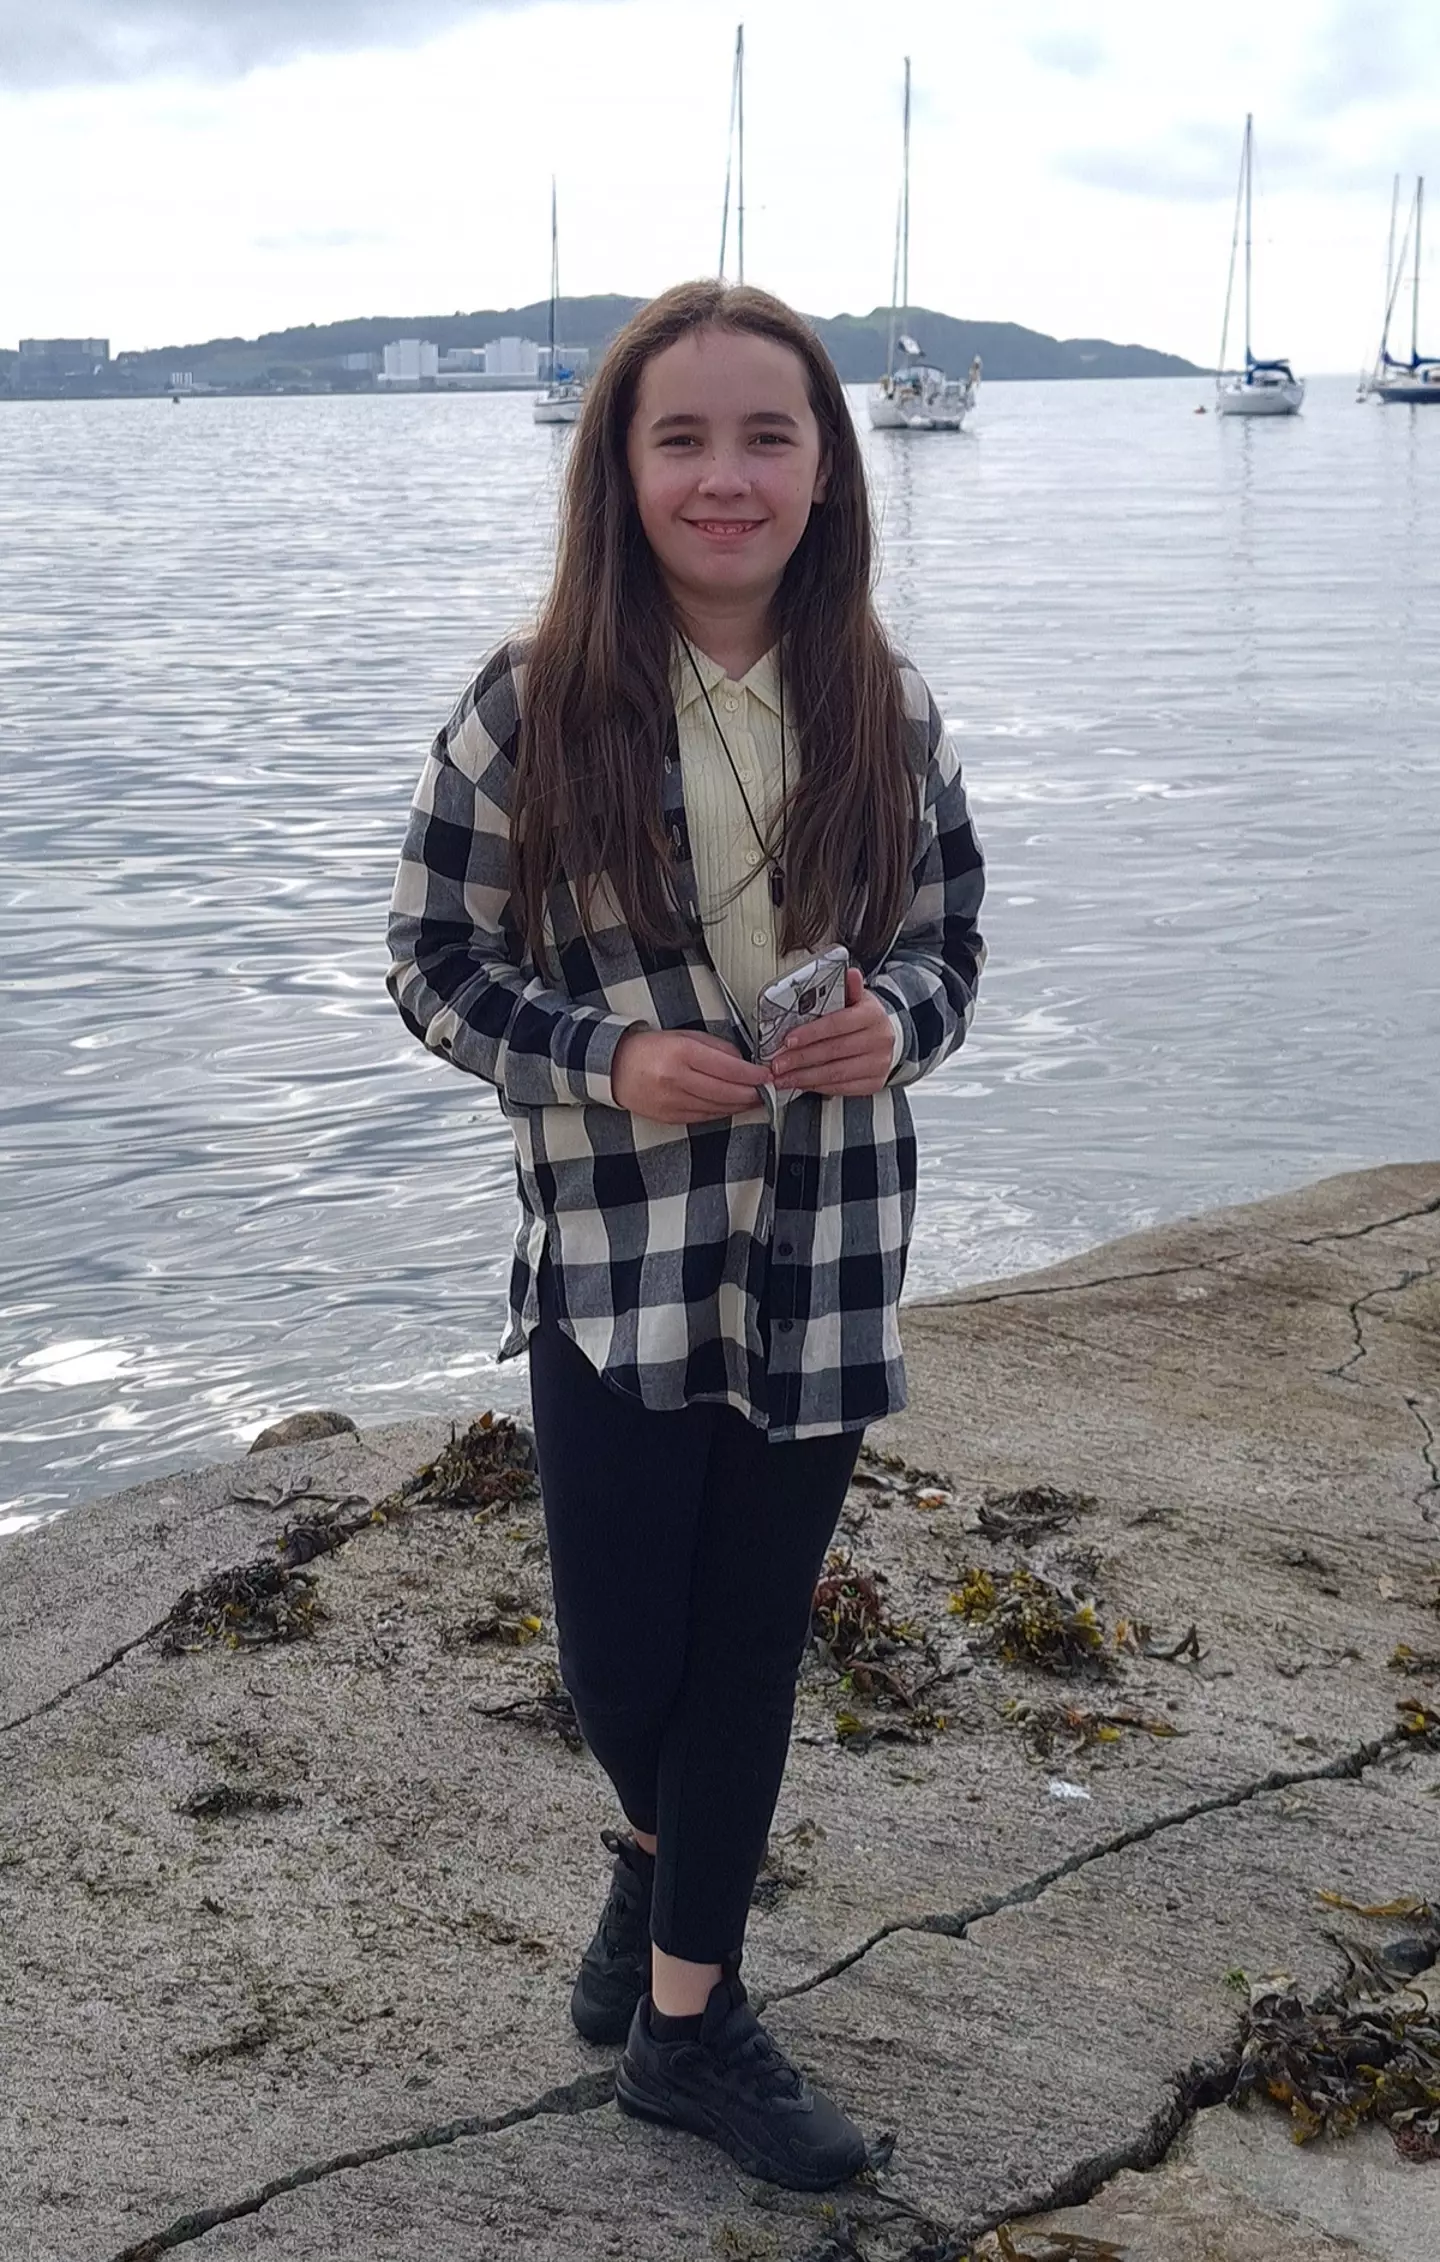 Gemma Caffrey, 12, died on holiday after 'suffering with headaches' the night before.